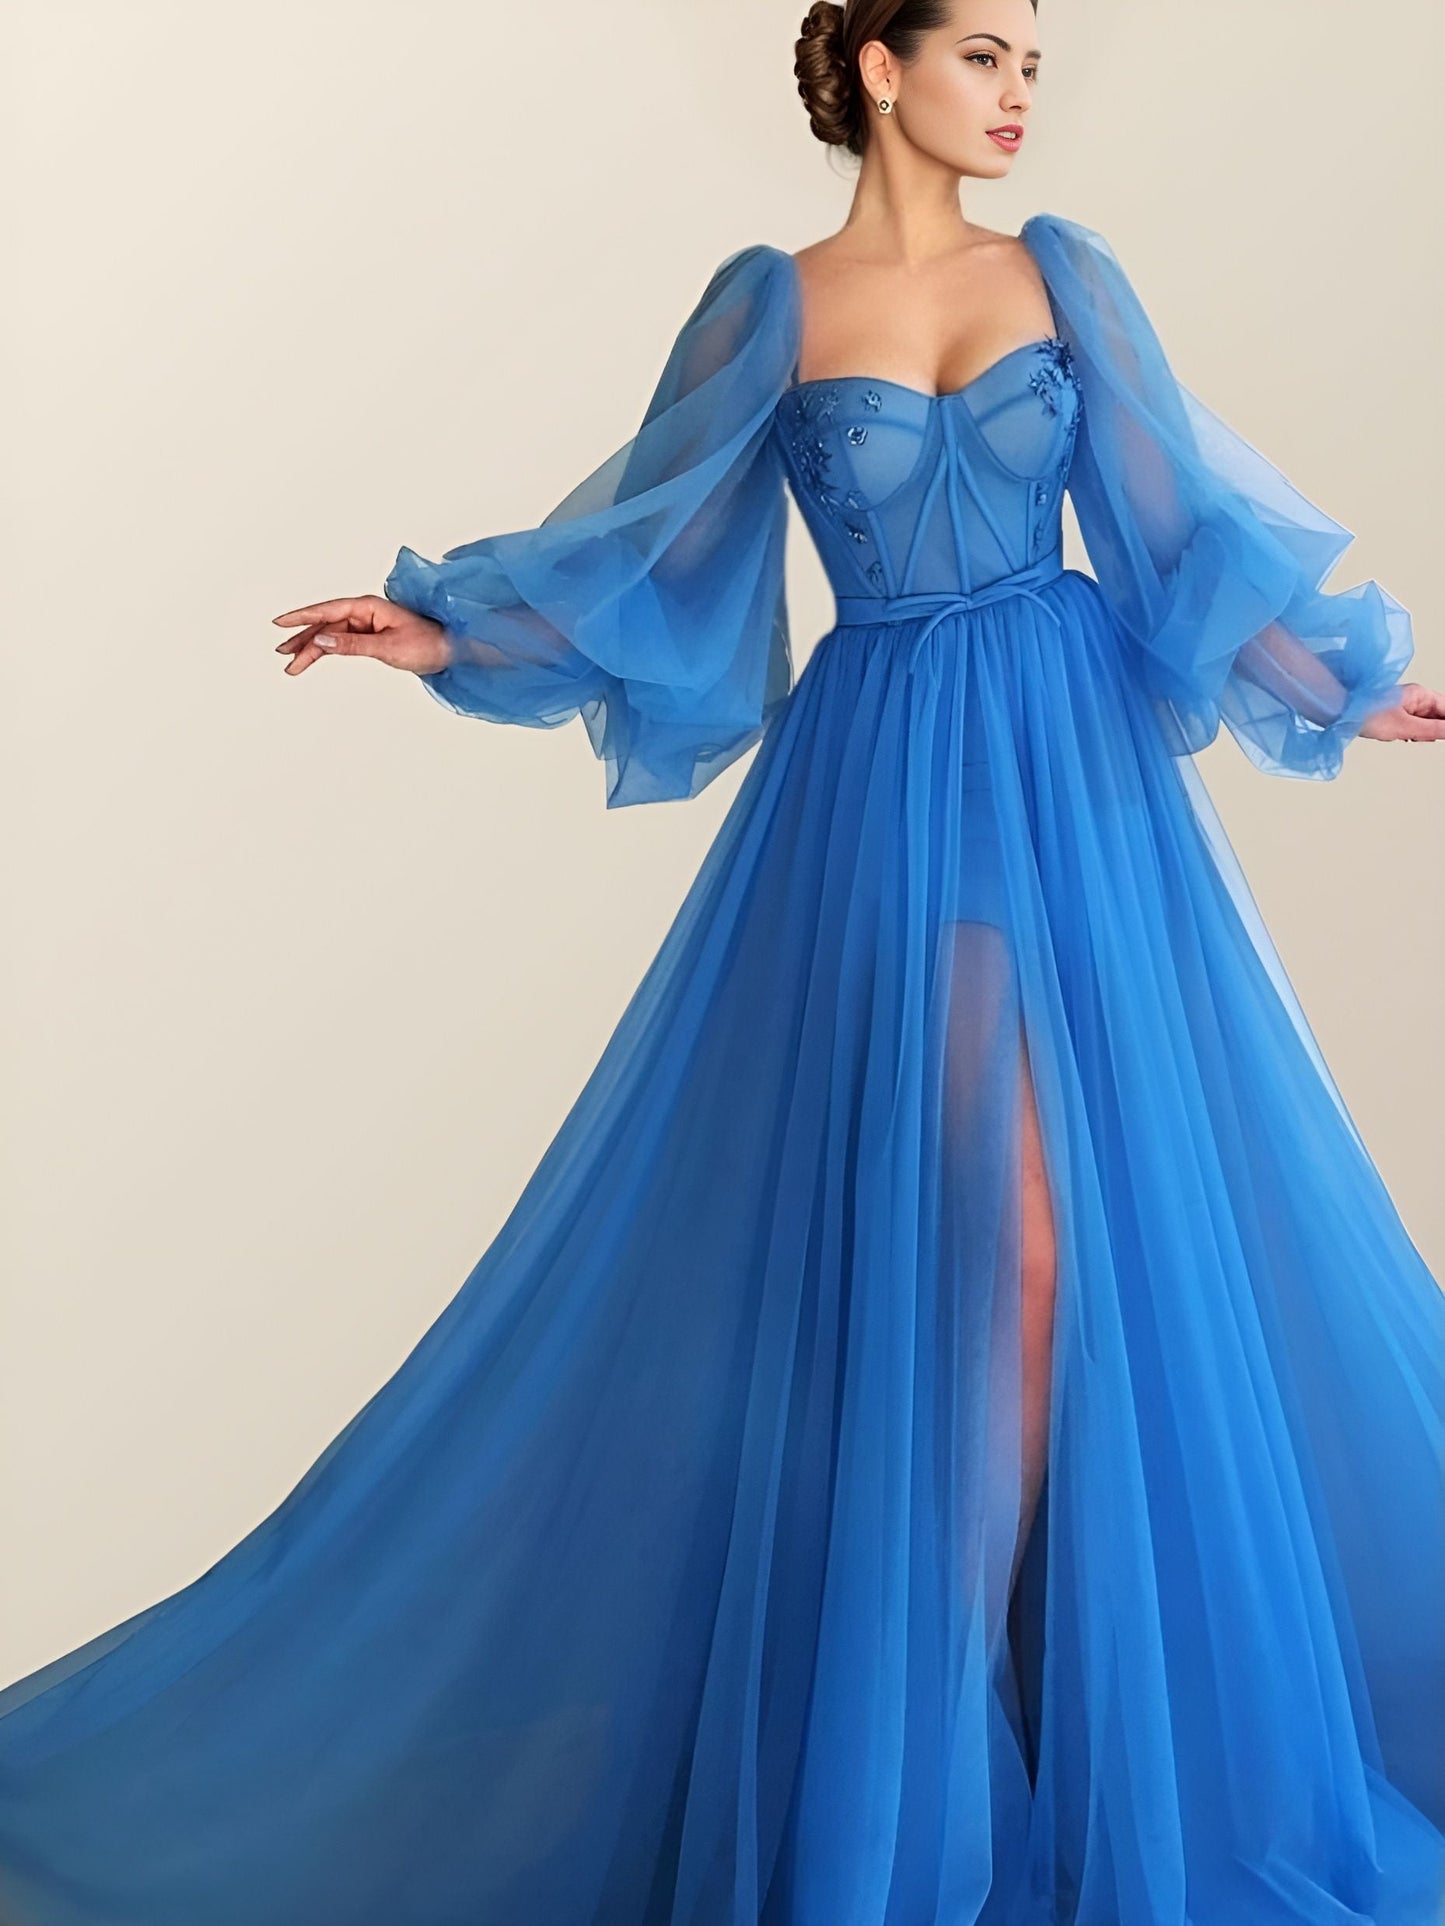 ELSA Robe Couture Formelle